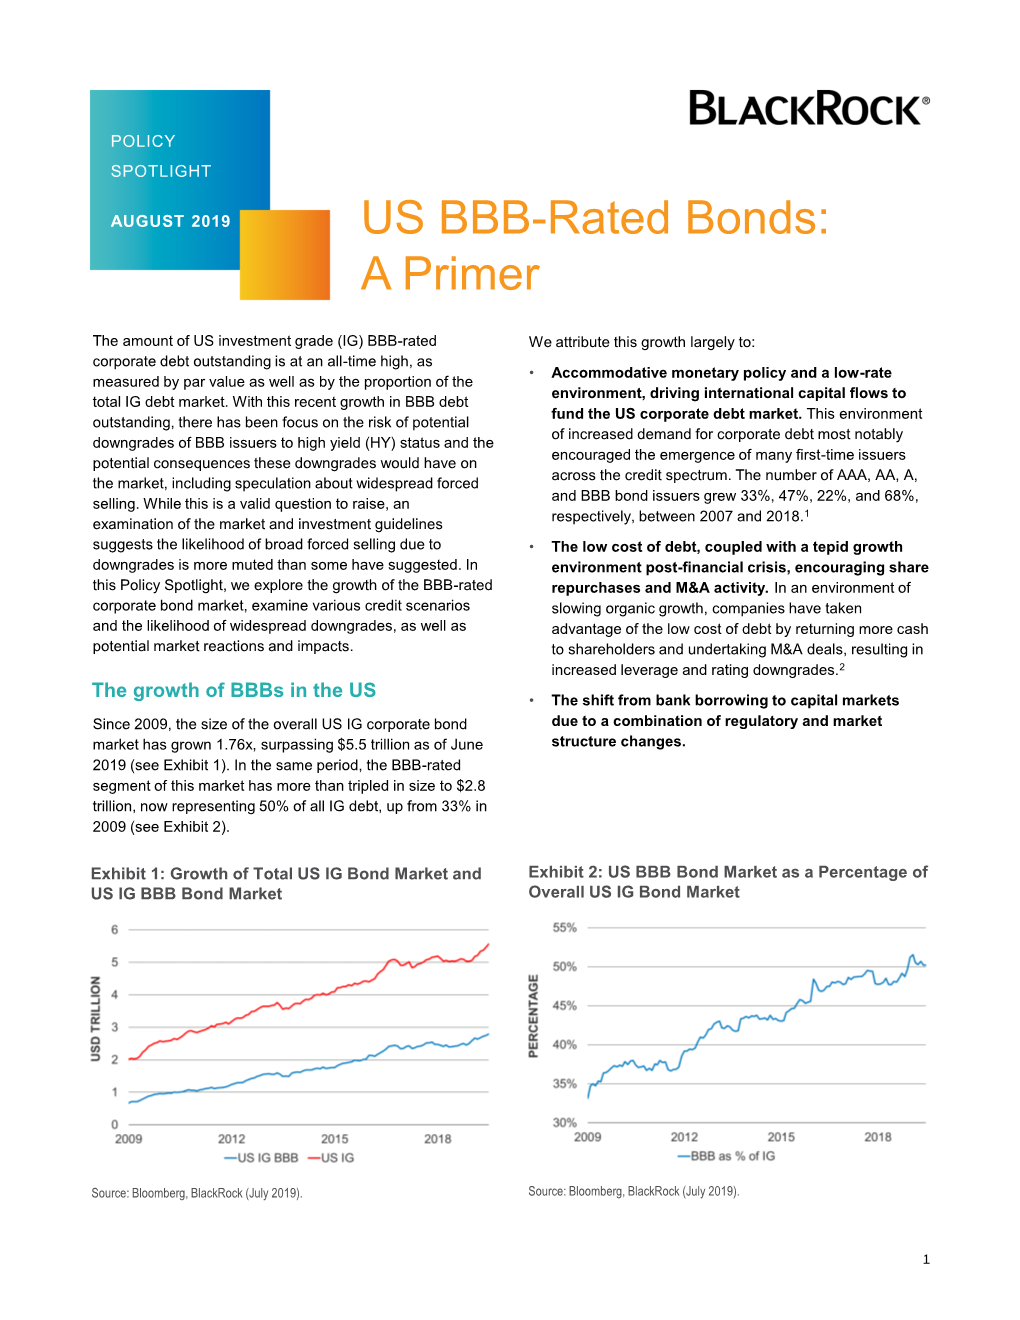 US BBB-Rated Bonds: a Primer